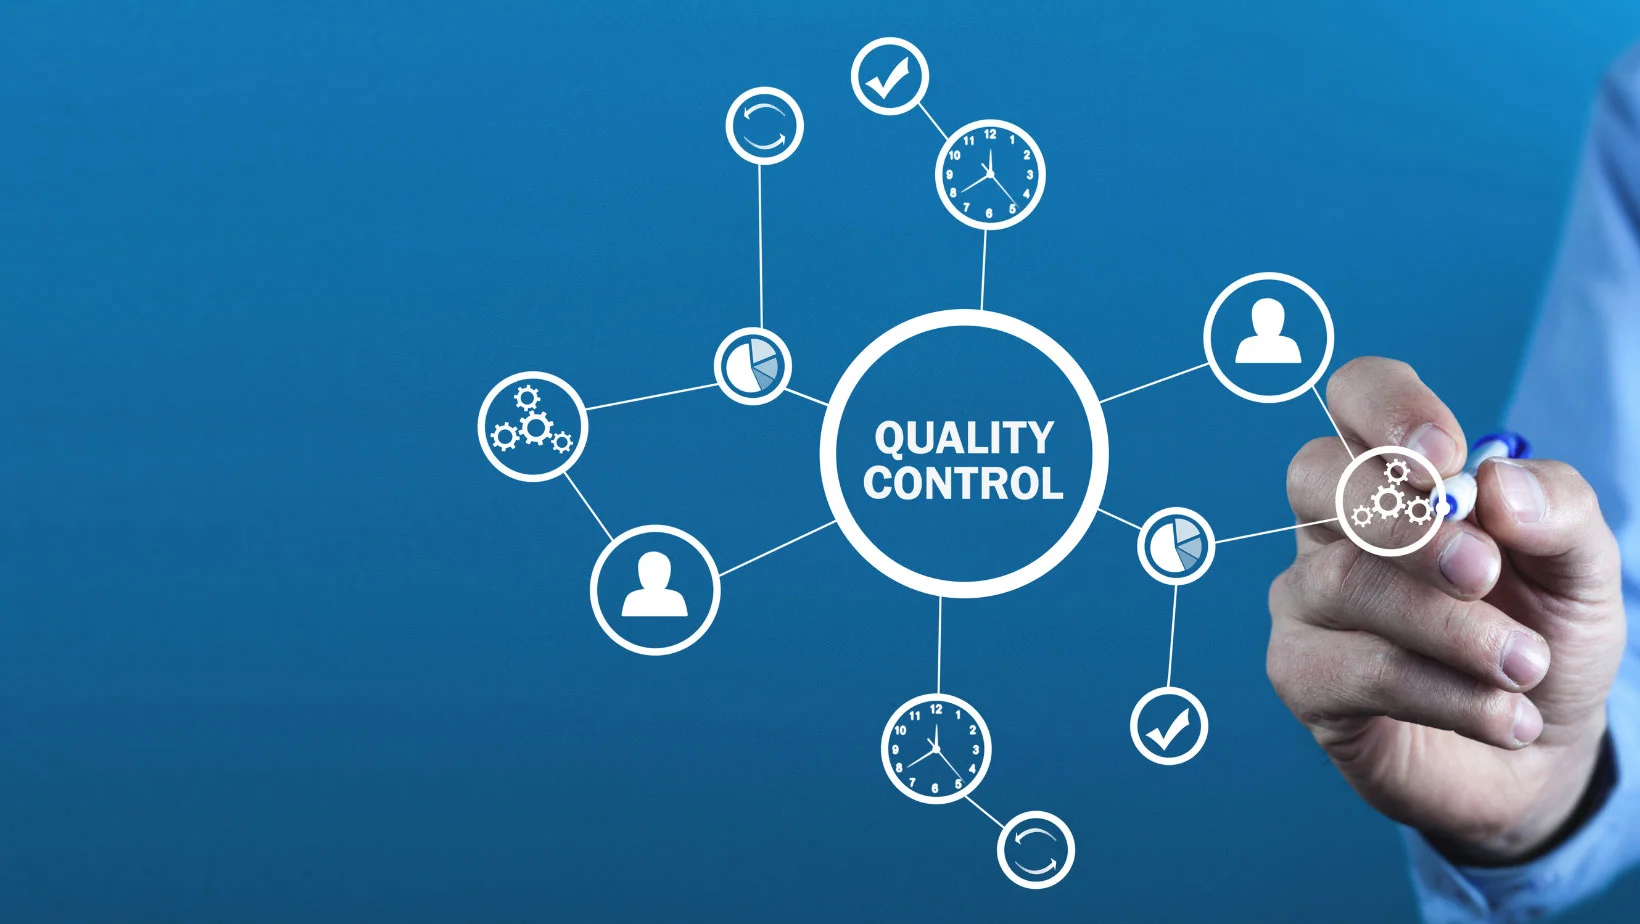 How Mes Improves Quality Control In Discrete Manufacturing